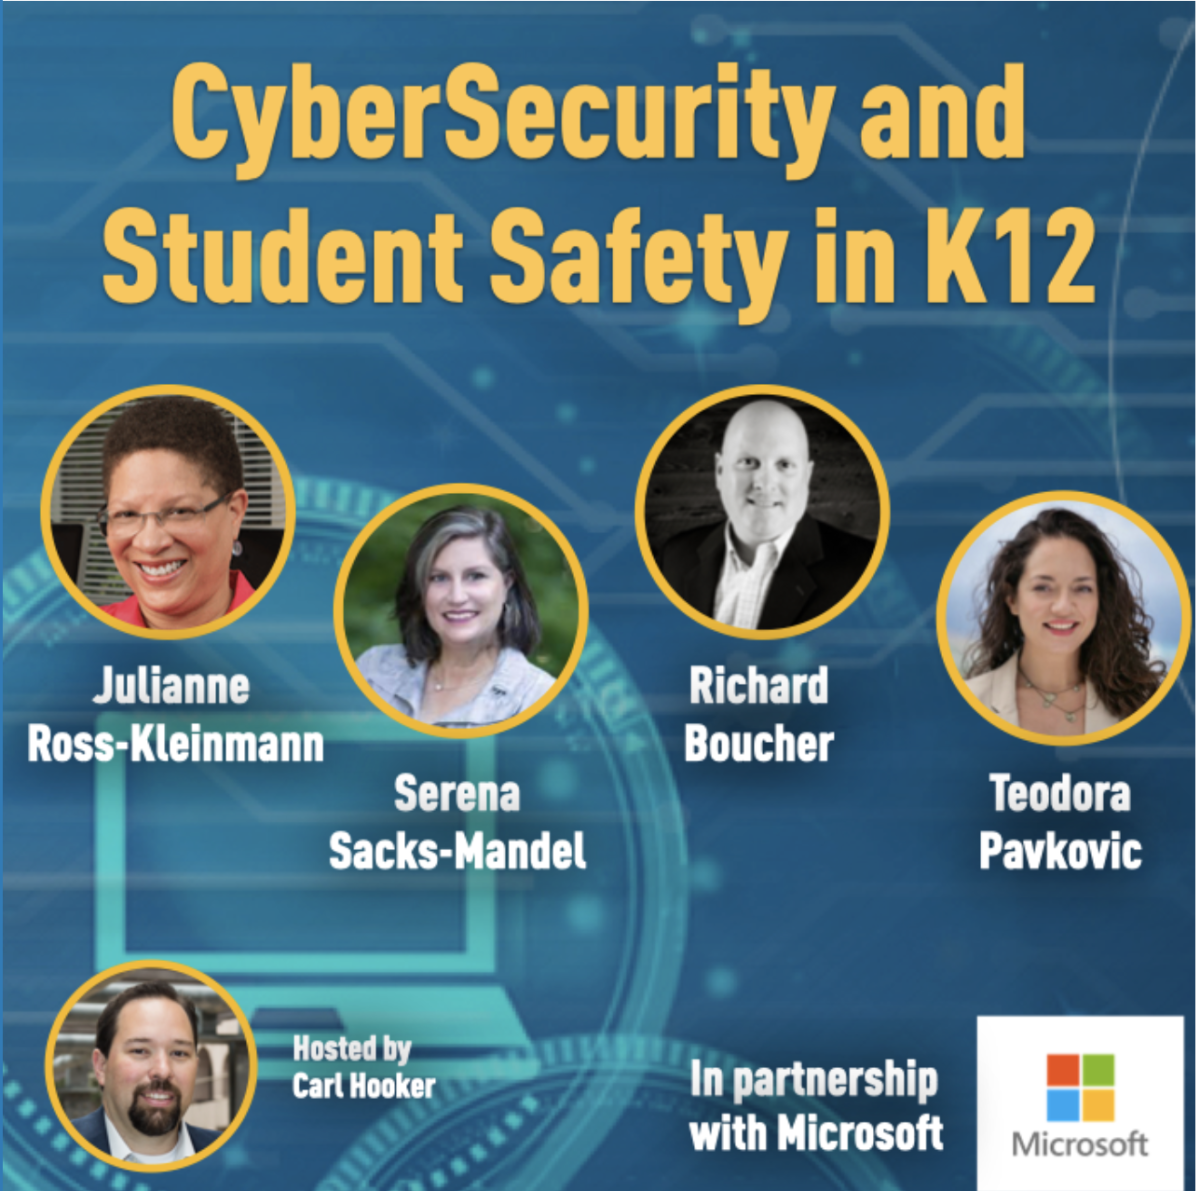 Cyber Security Student Safety graphic